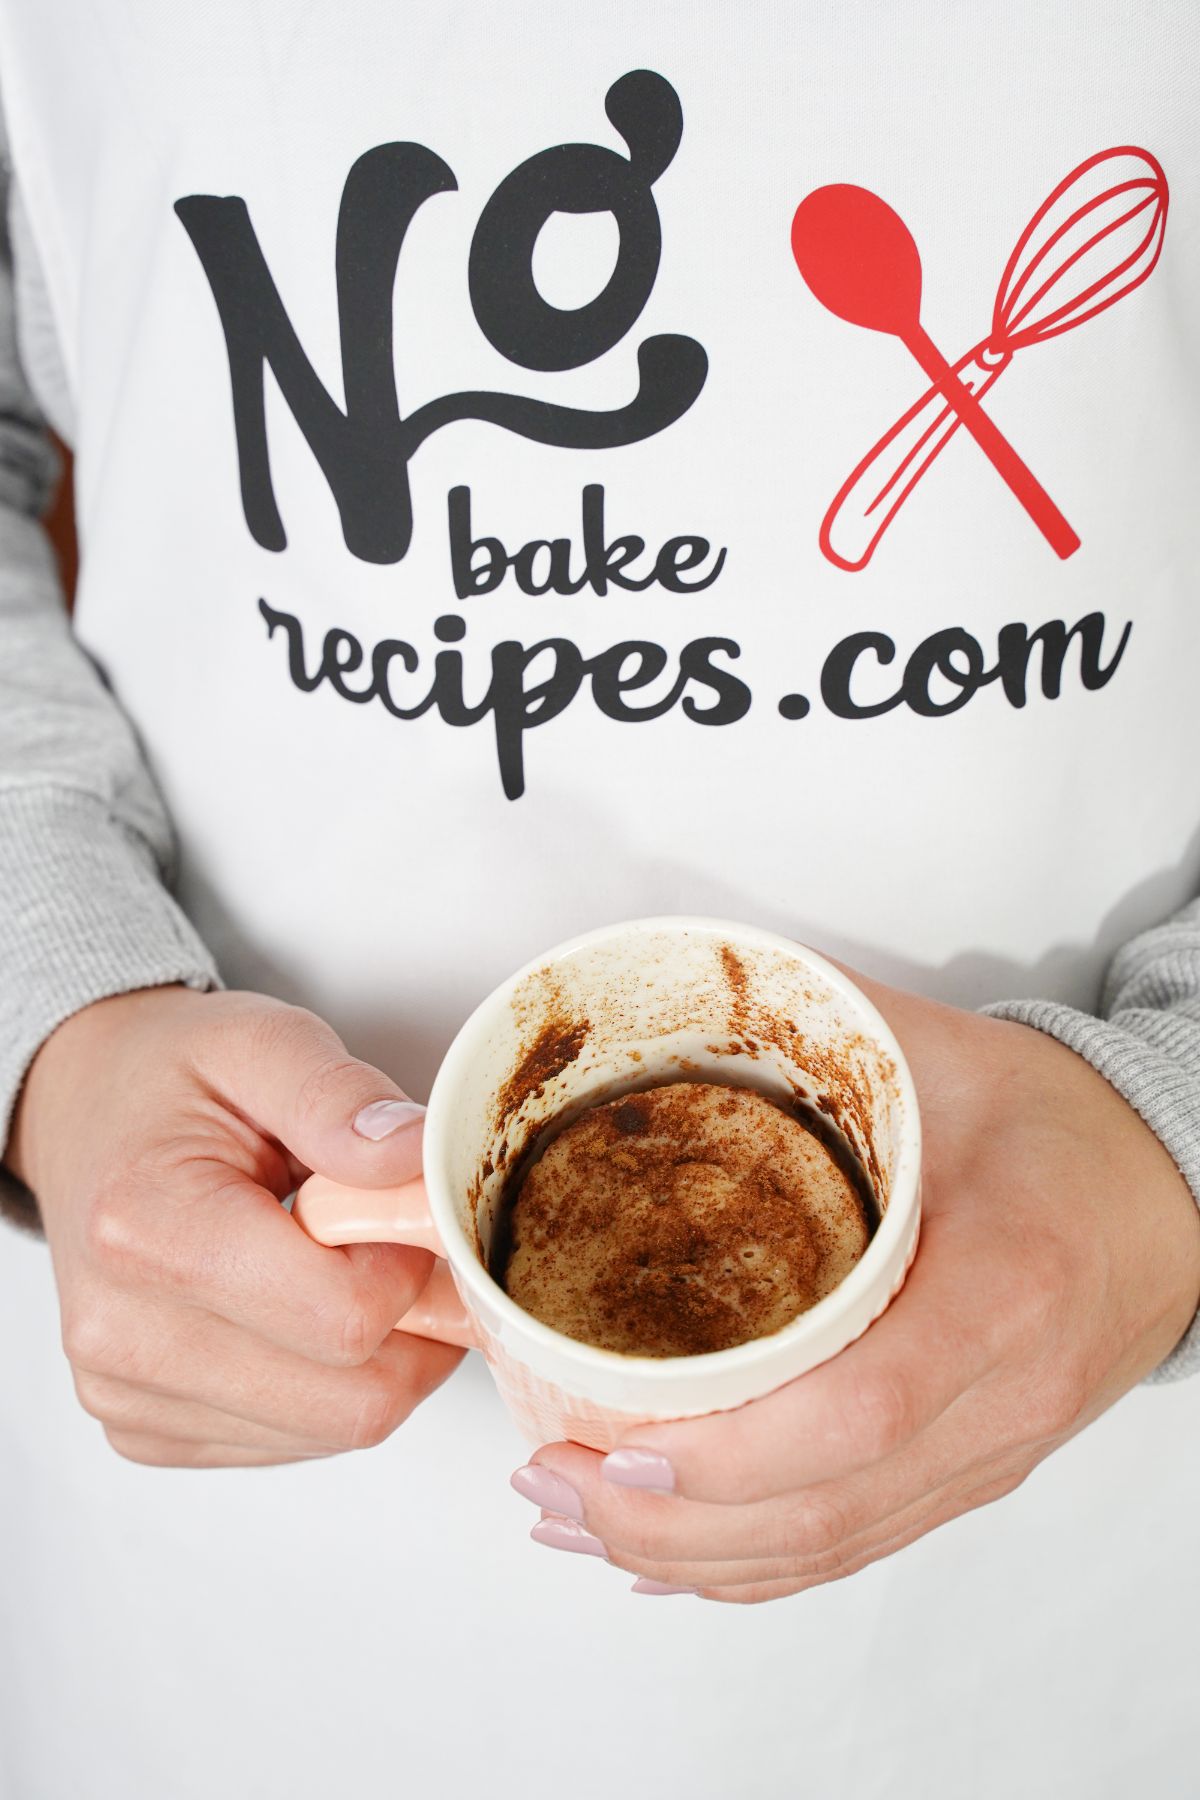 Microwave Snickerdoodle Mug Cake ready to enjoy  with some tea or coffee